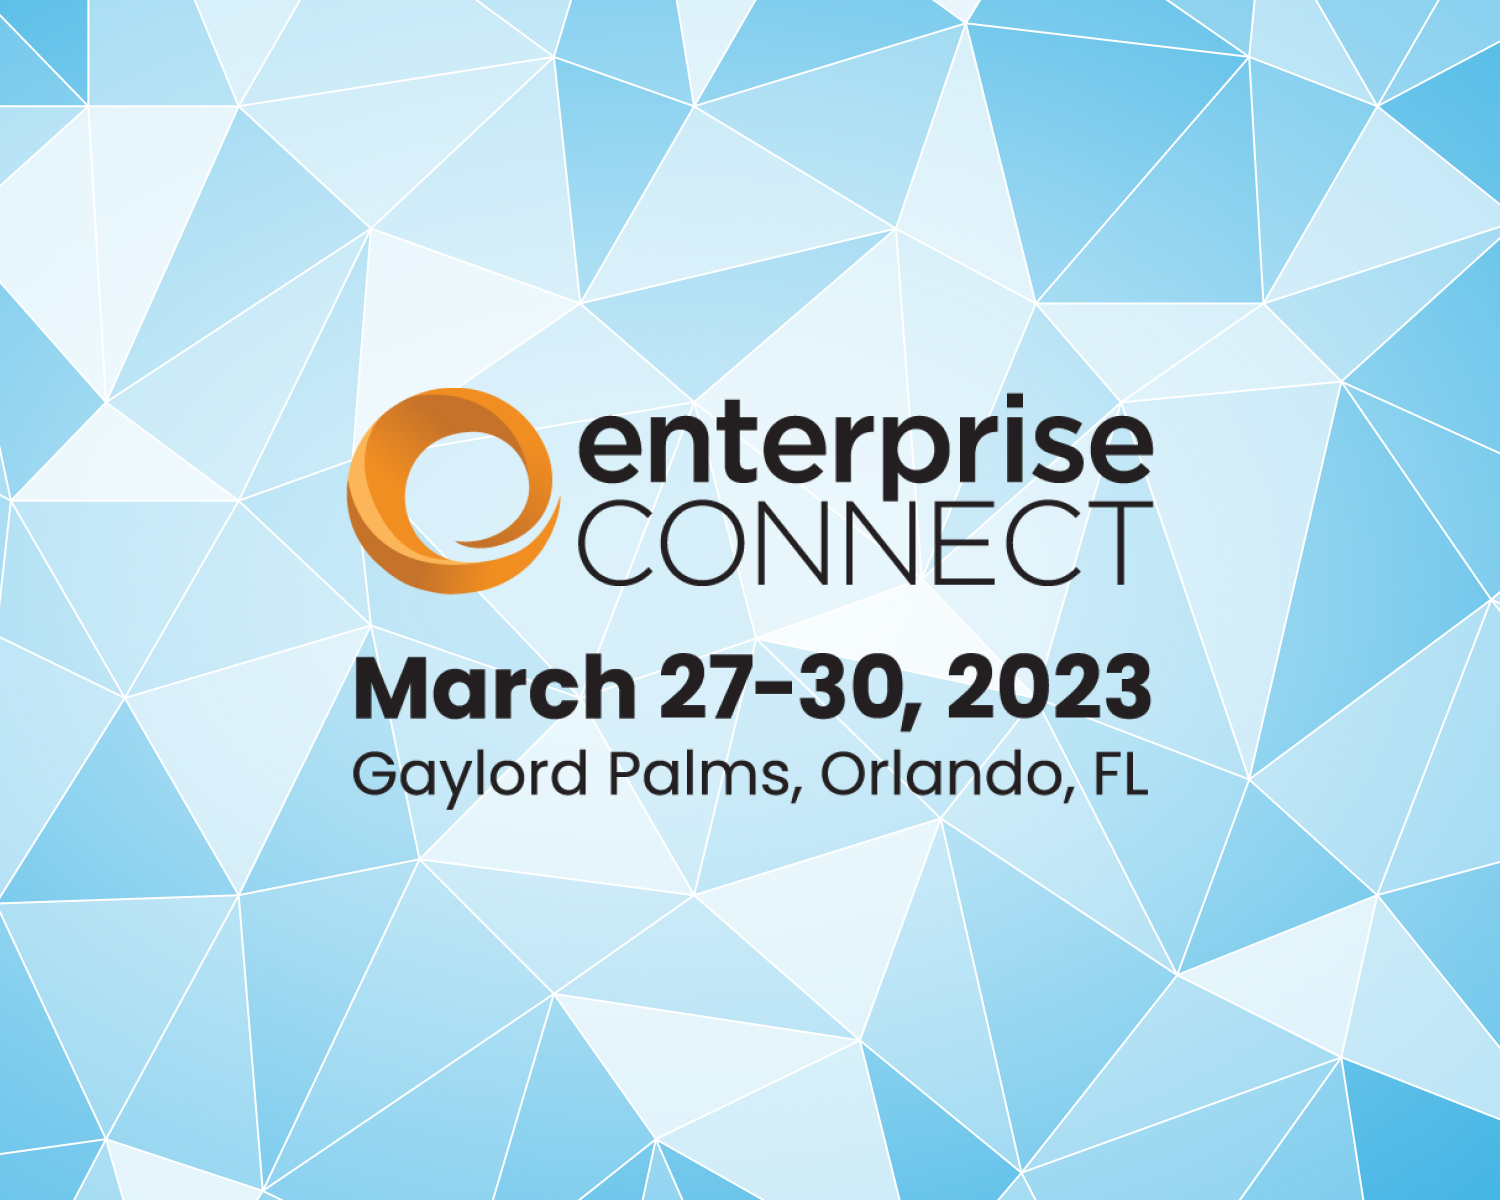 NIX to Exhibit at Enterprise Connect 2023, Leading Conference and Exhibition for Enterprise Communications and Collaboration